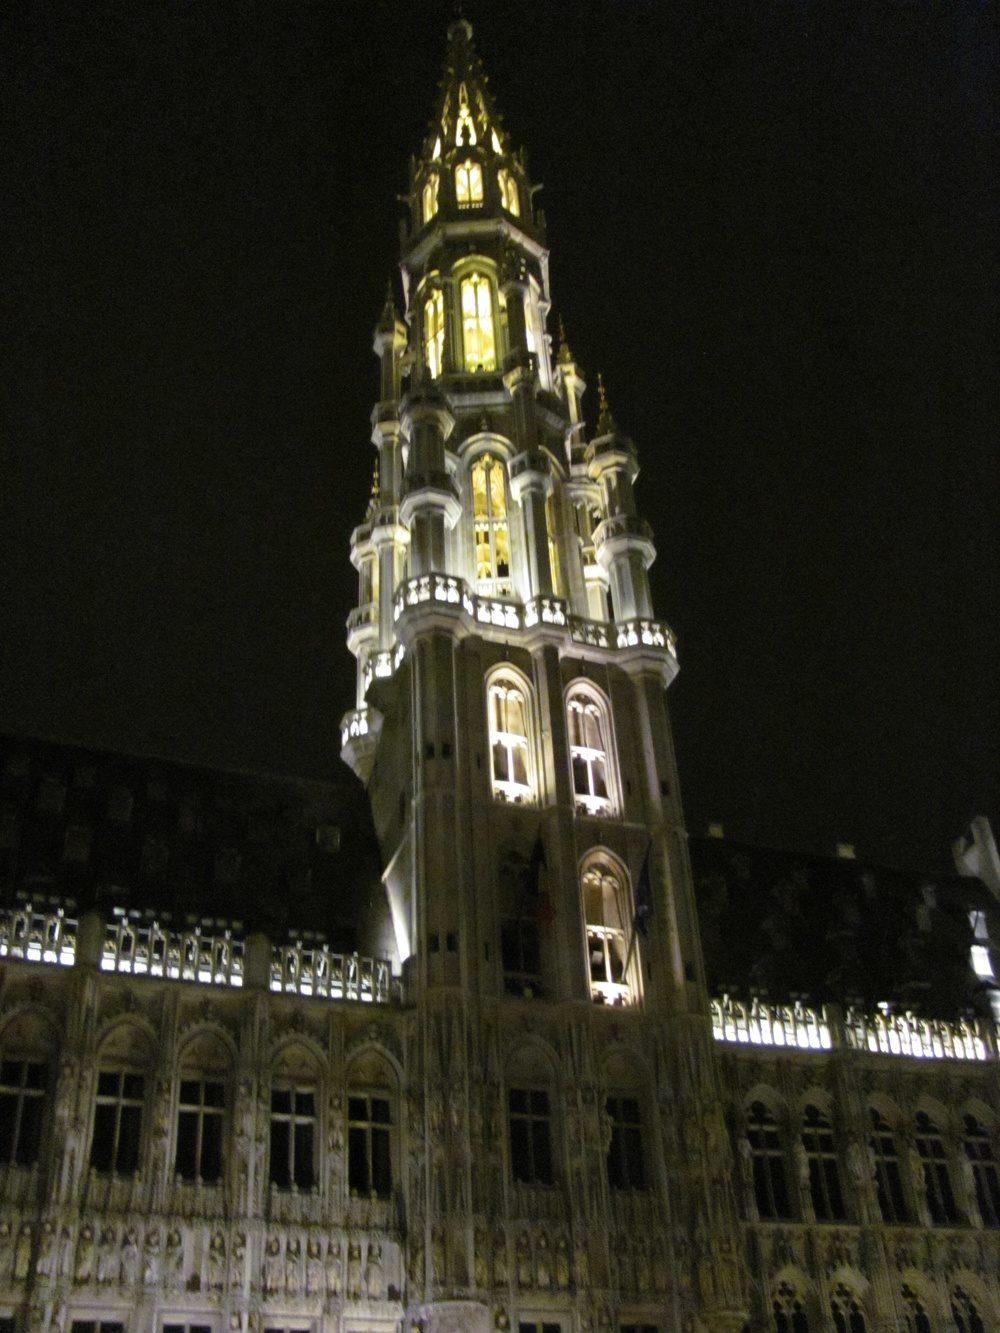  Hotel de Ville de Bruxelles - formerly Town Hall, 15th Century Gothic, Grand Place, Old City Brussels, Belgium, VHS 2010 